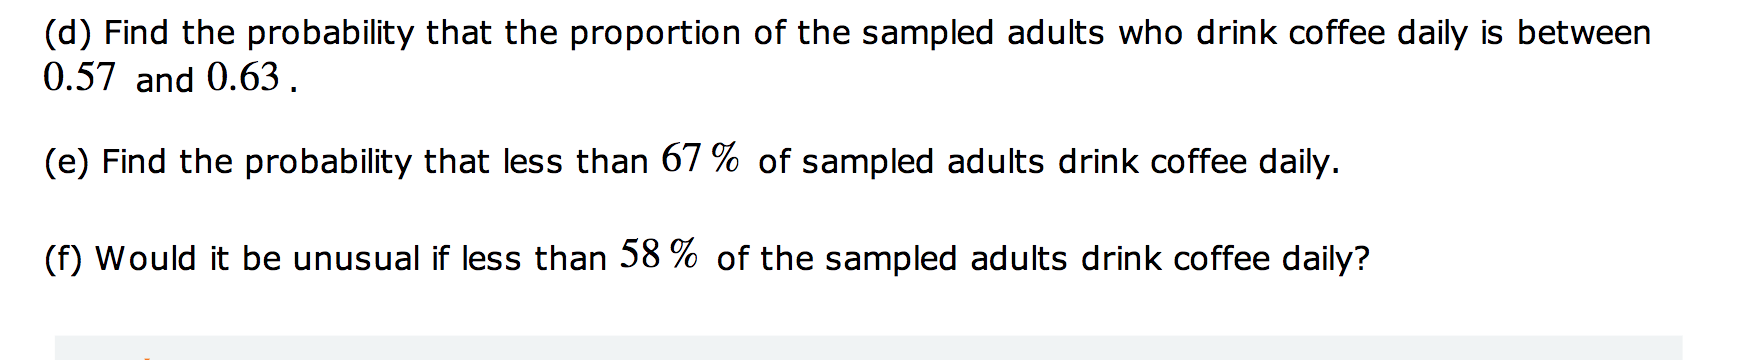 (d) Find the probability that the proportion of the sampled adults who drink coffee daily is between
0.57 and 0.63.
(e) Find the probability that less than 67 % of sampled adults drink coffee daily.
(f) Would it be unusual if less than 58 % of the sampled adults drink coffee daily?
